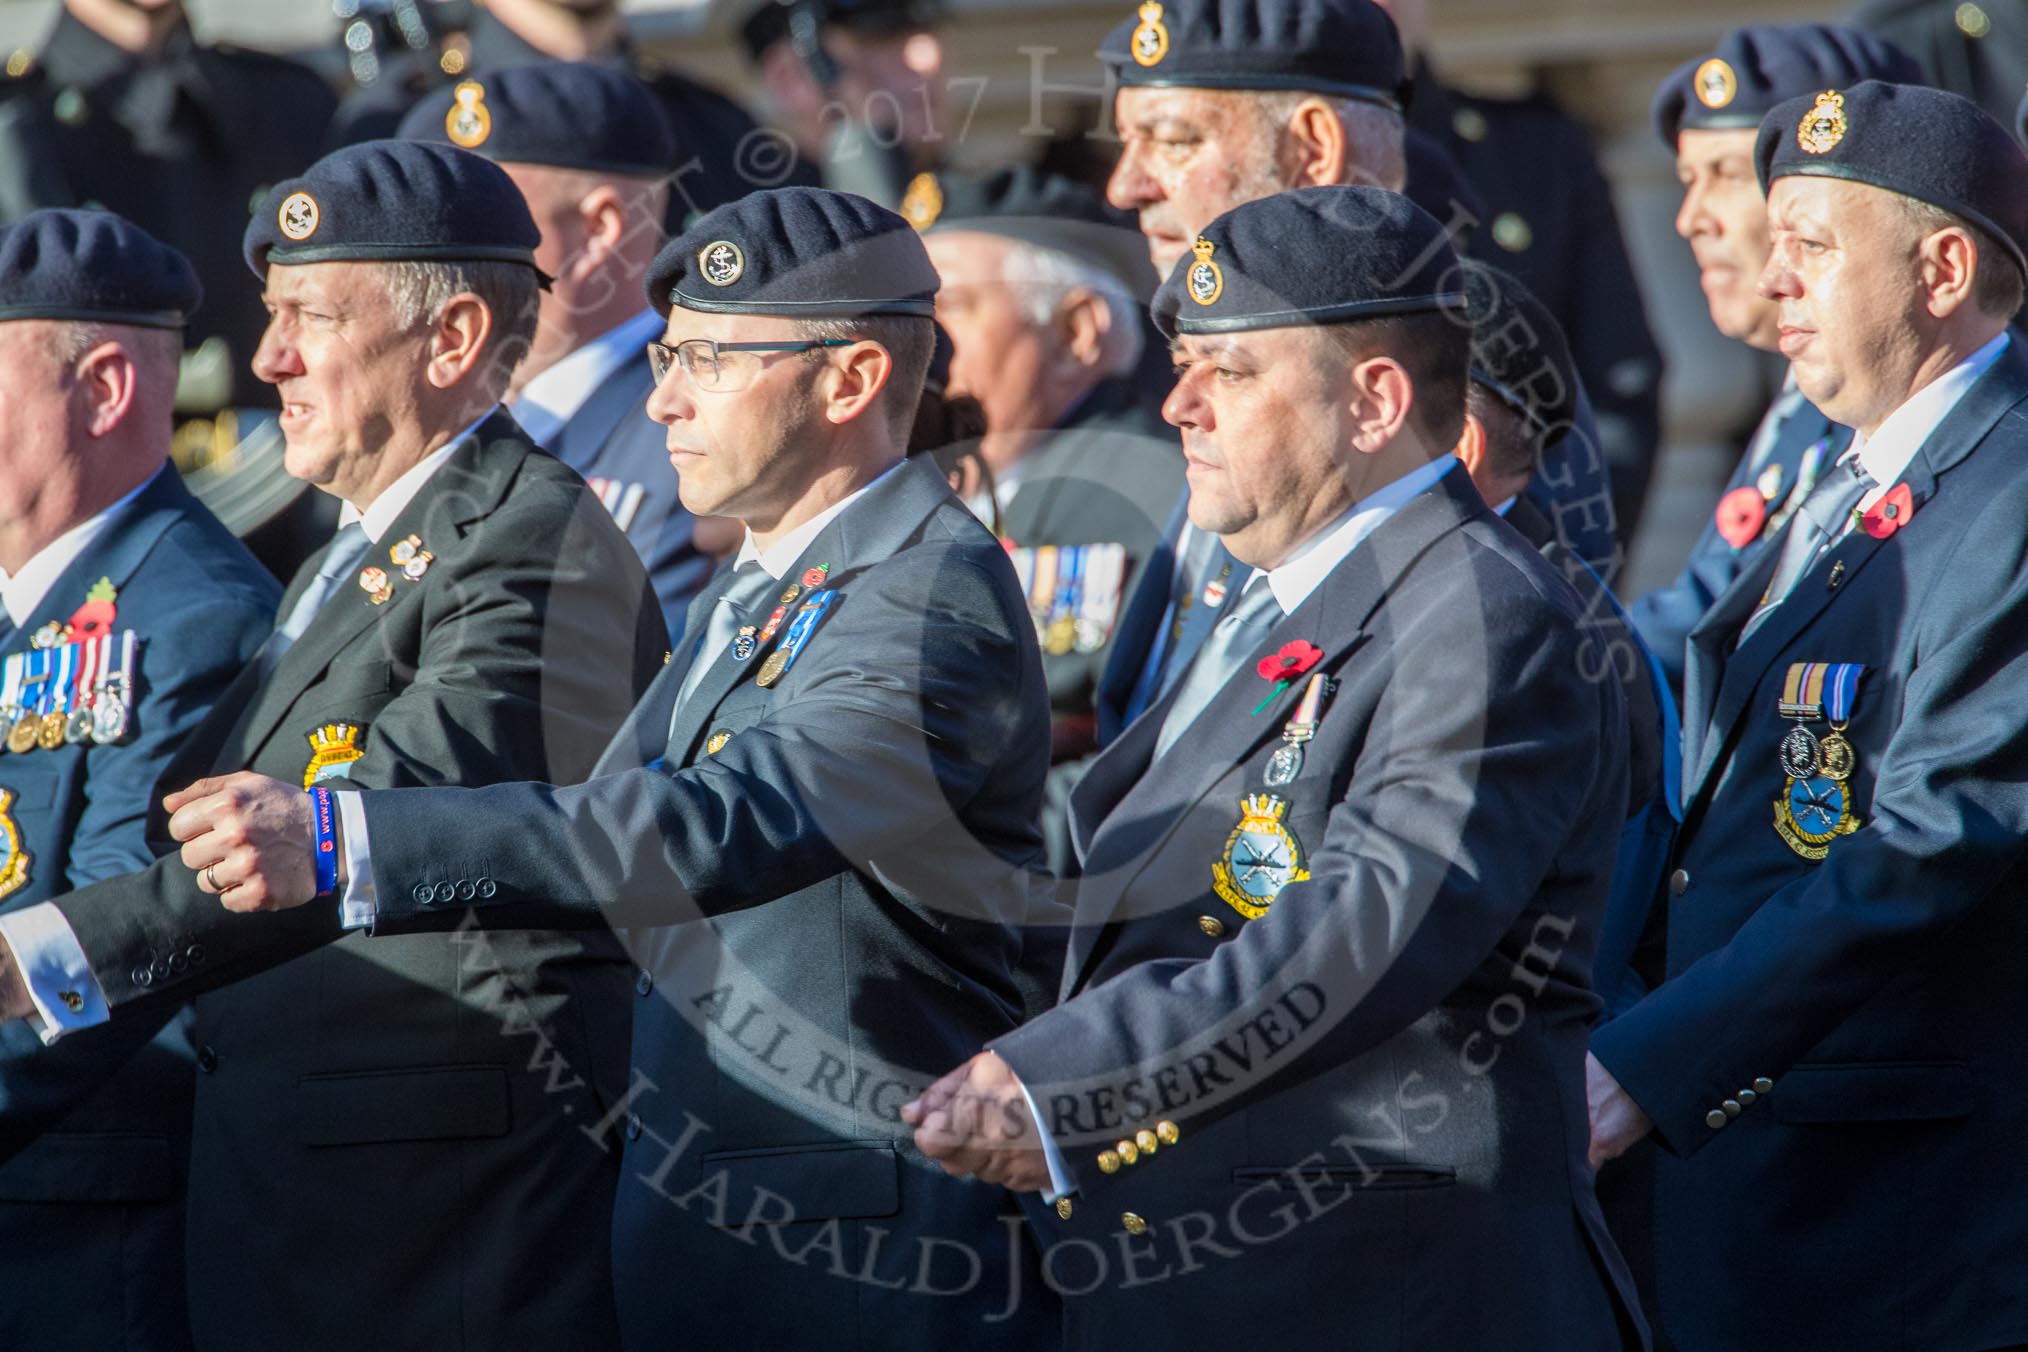 Type 42 Association   (Group E30, 47 members) during the Royal British Legion March Past on Remembrance Sunday at the Cenotaph, Whitehall, Westminster, London, 11 November 2018, 11:45.